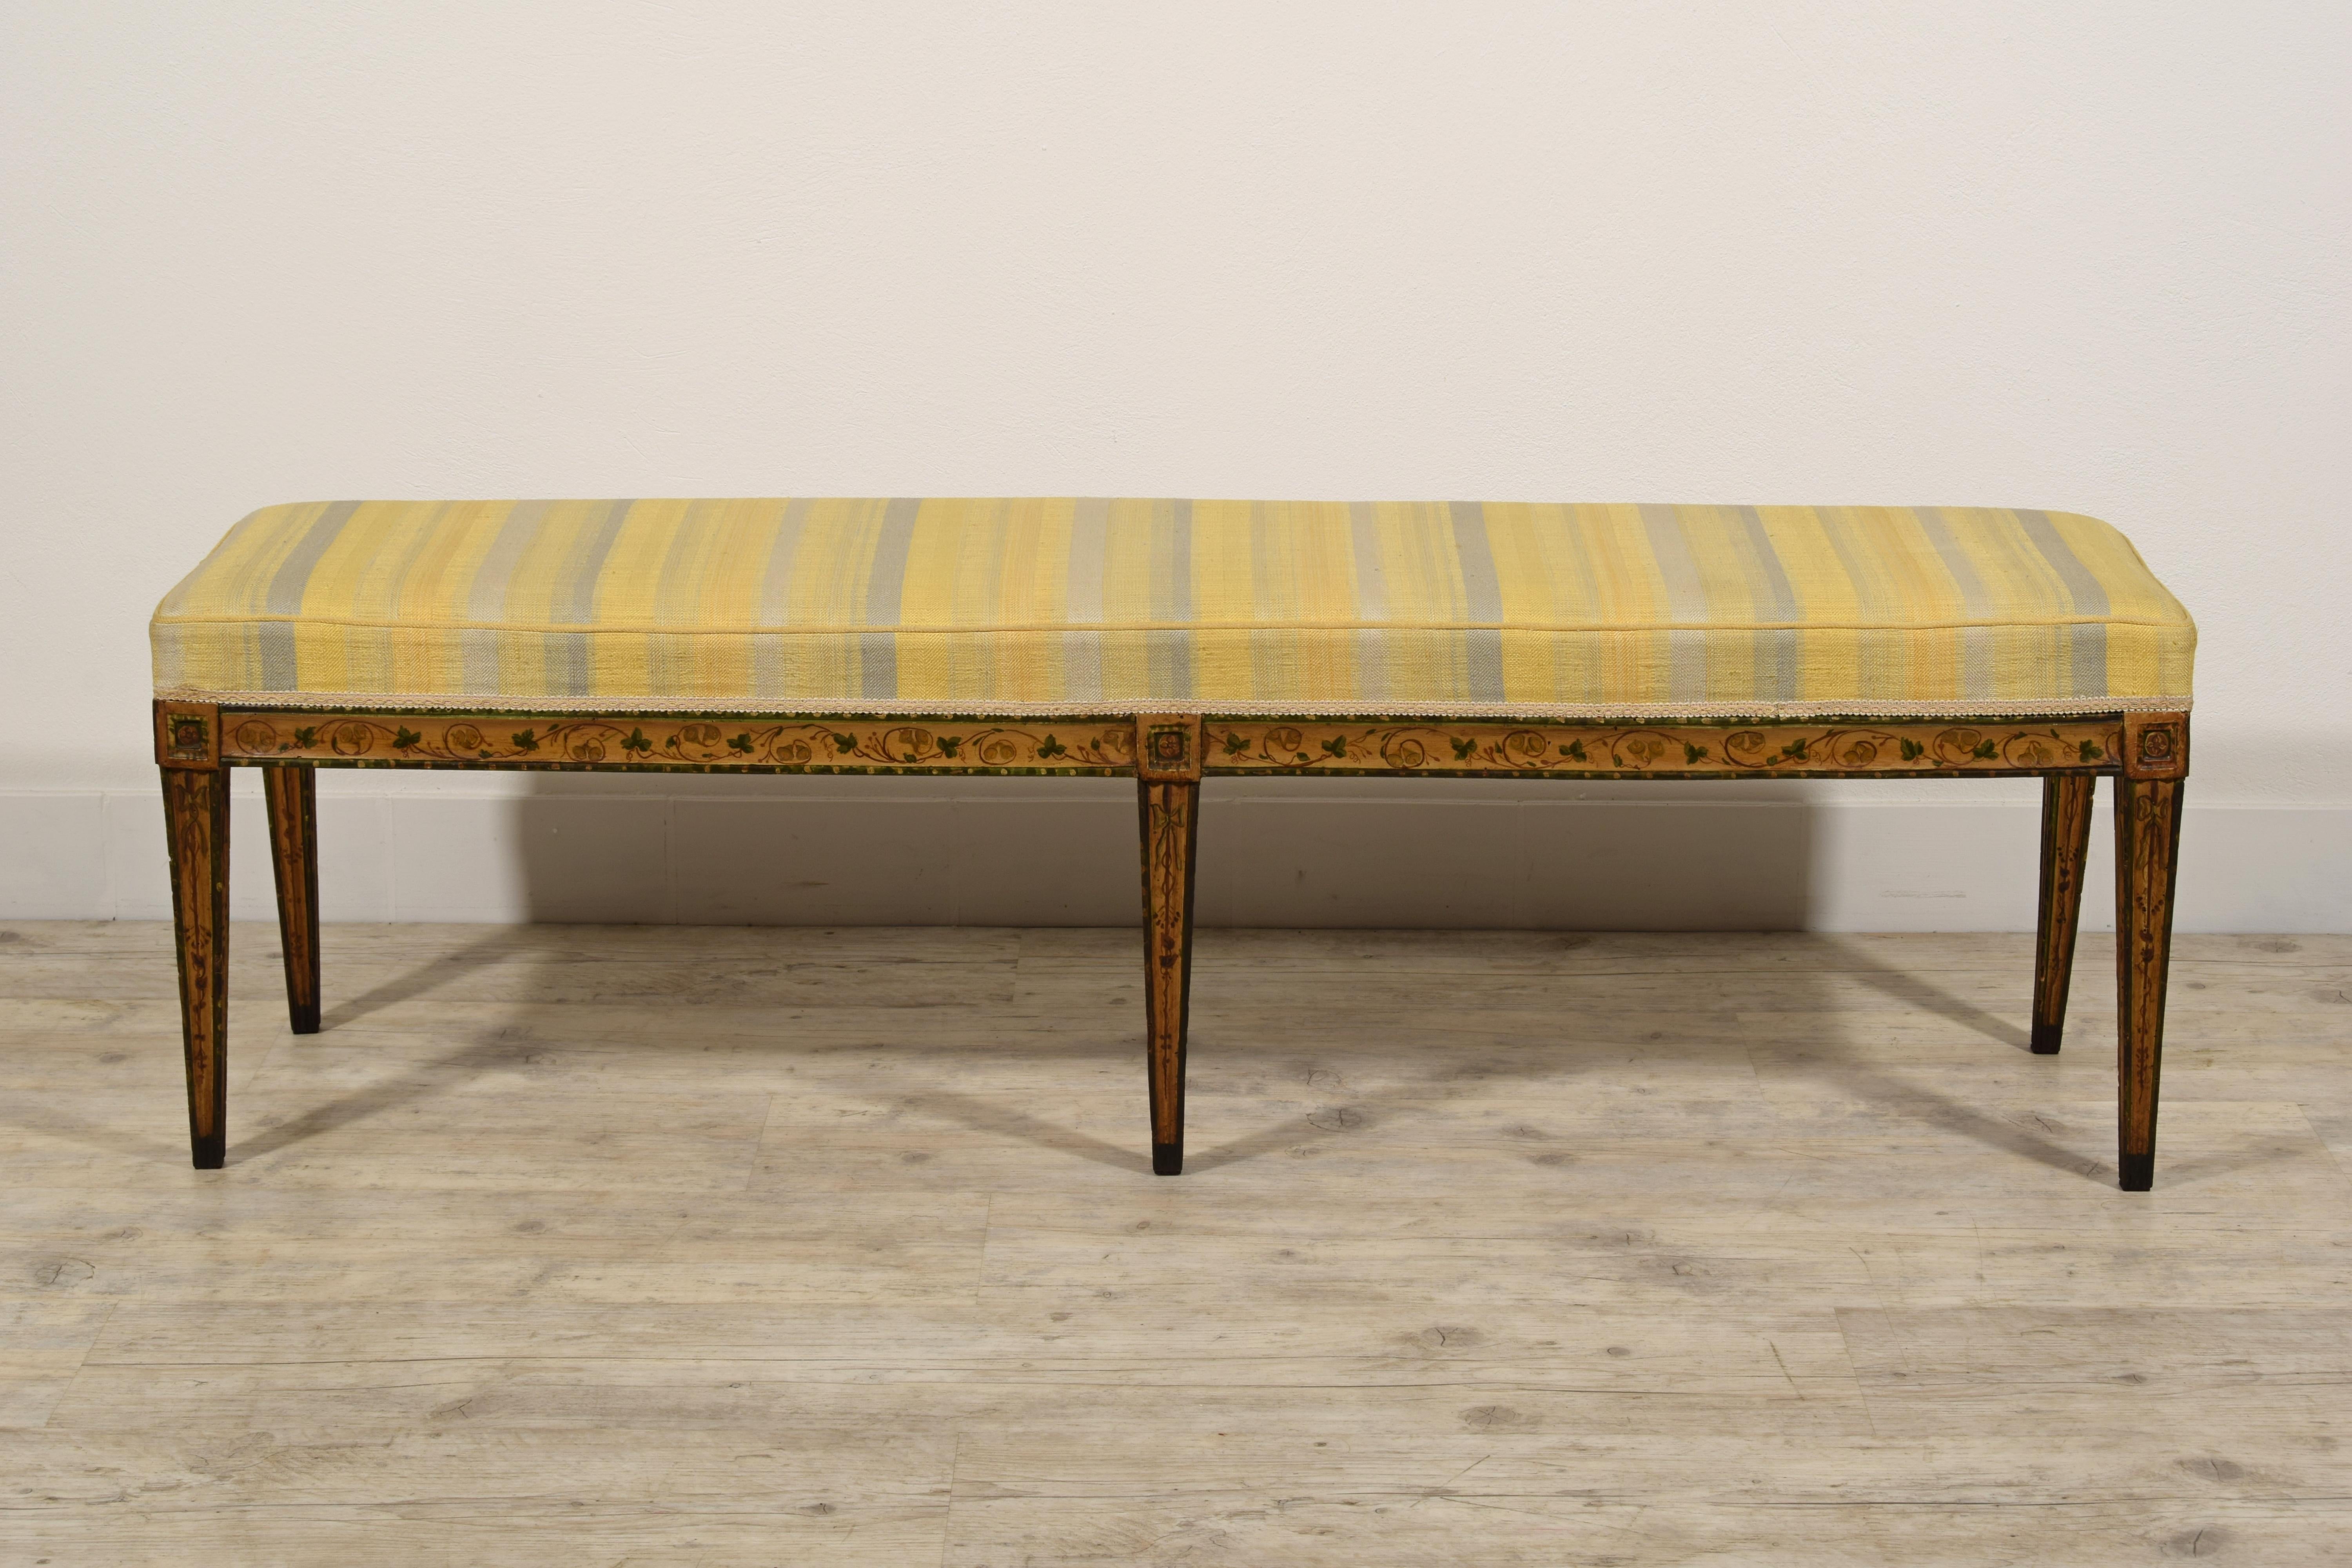 19th Century, Italian Six-legged Centre Bench Lacquered Wood with Ramage Motive 4